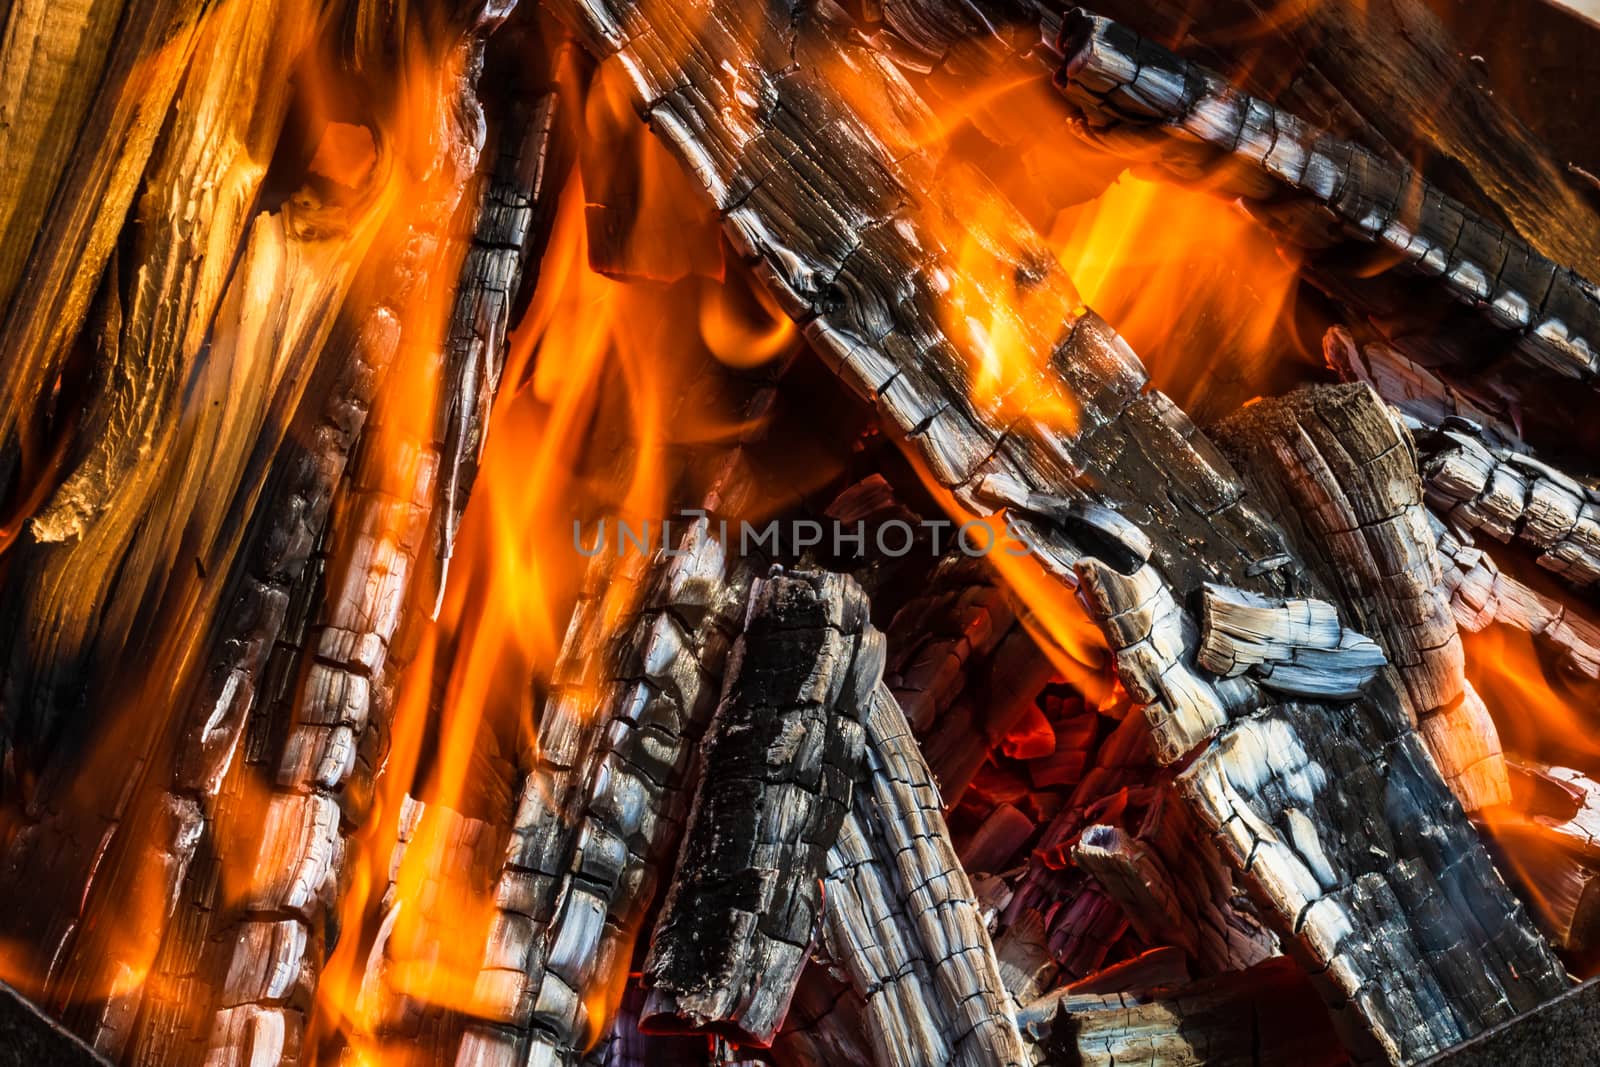 Burning wood chips forming coal. Barbecue preparation, fire before cooking. Hot coal made of greatly heated wood.